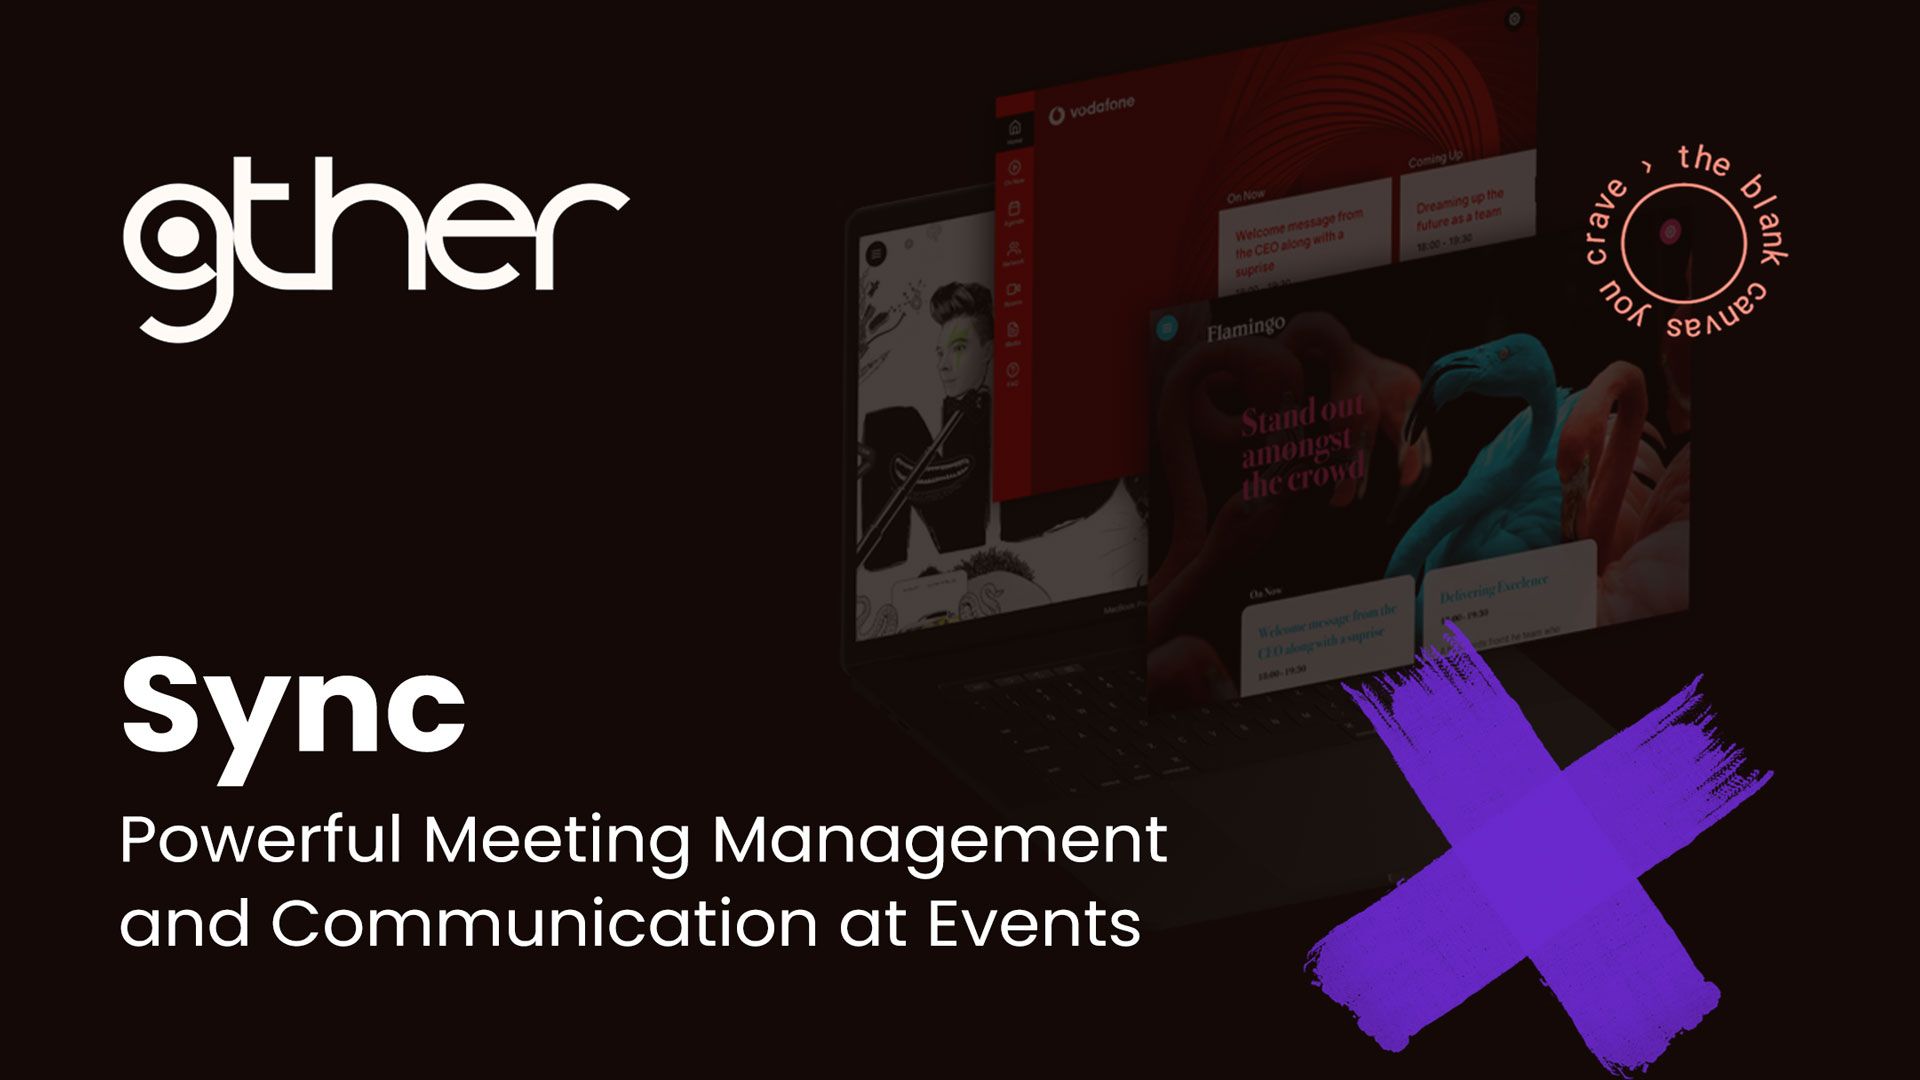 gther Sync - Powerful Event Meeting Management and Communication